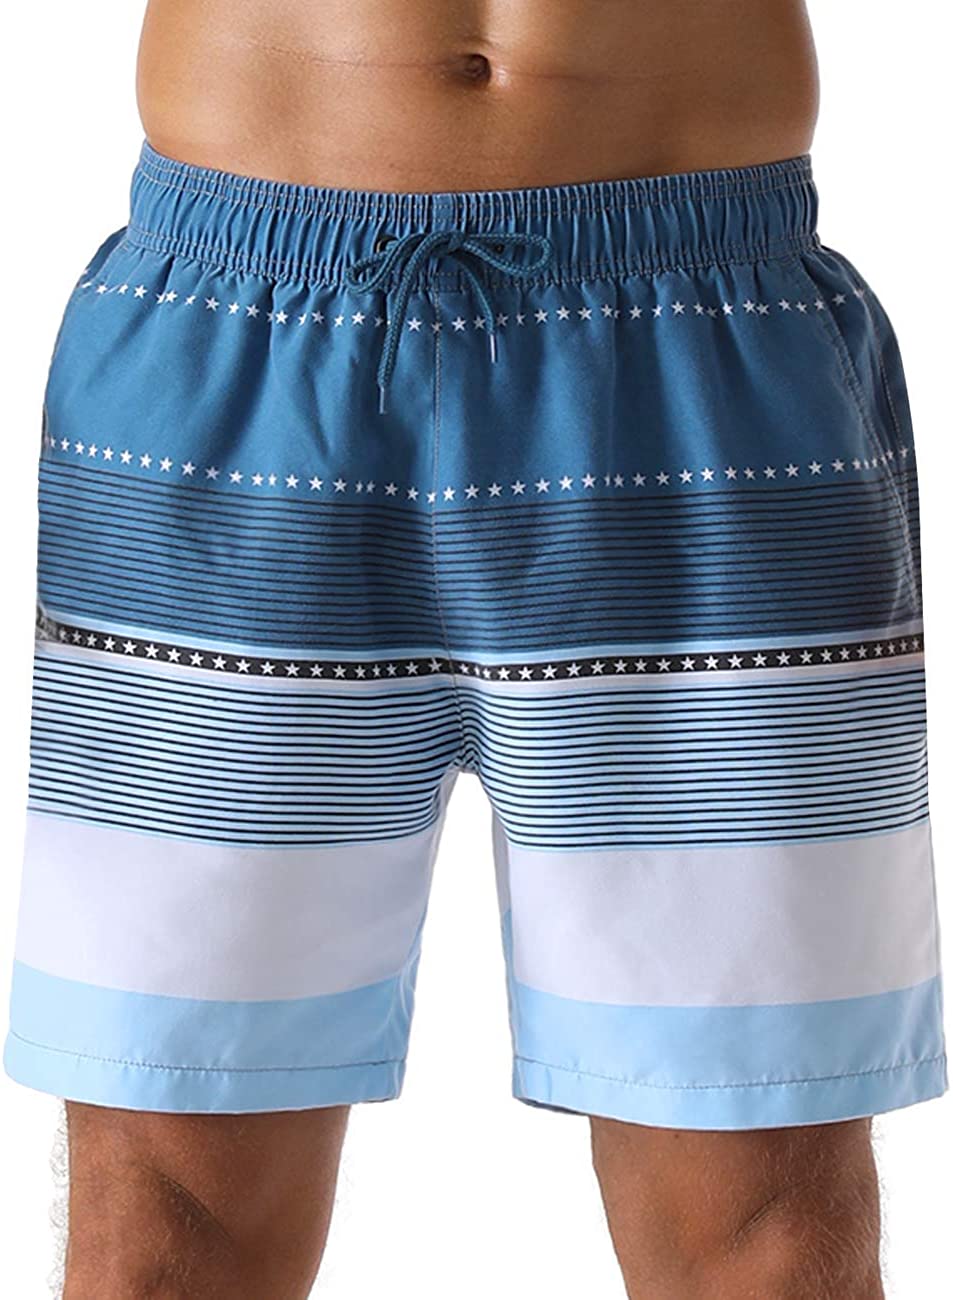 unitop Men's Board Shorts Quick Dry Washed Vintage Bathing Trunks 